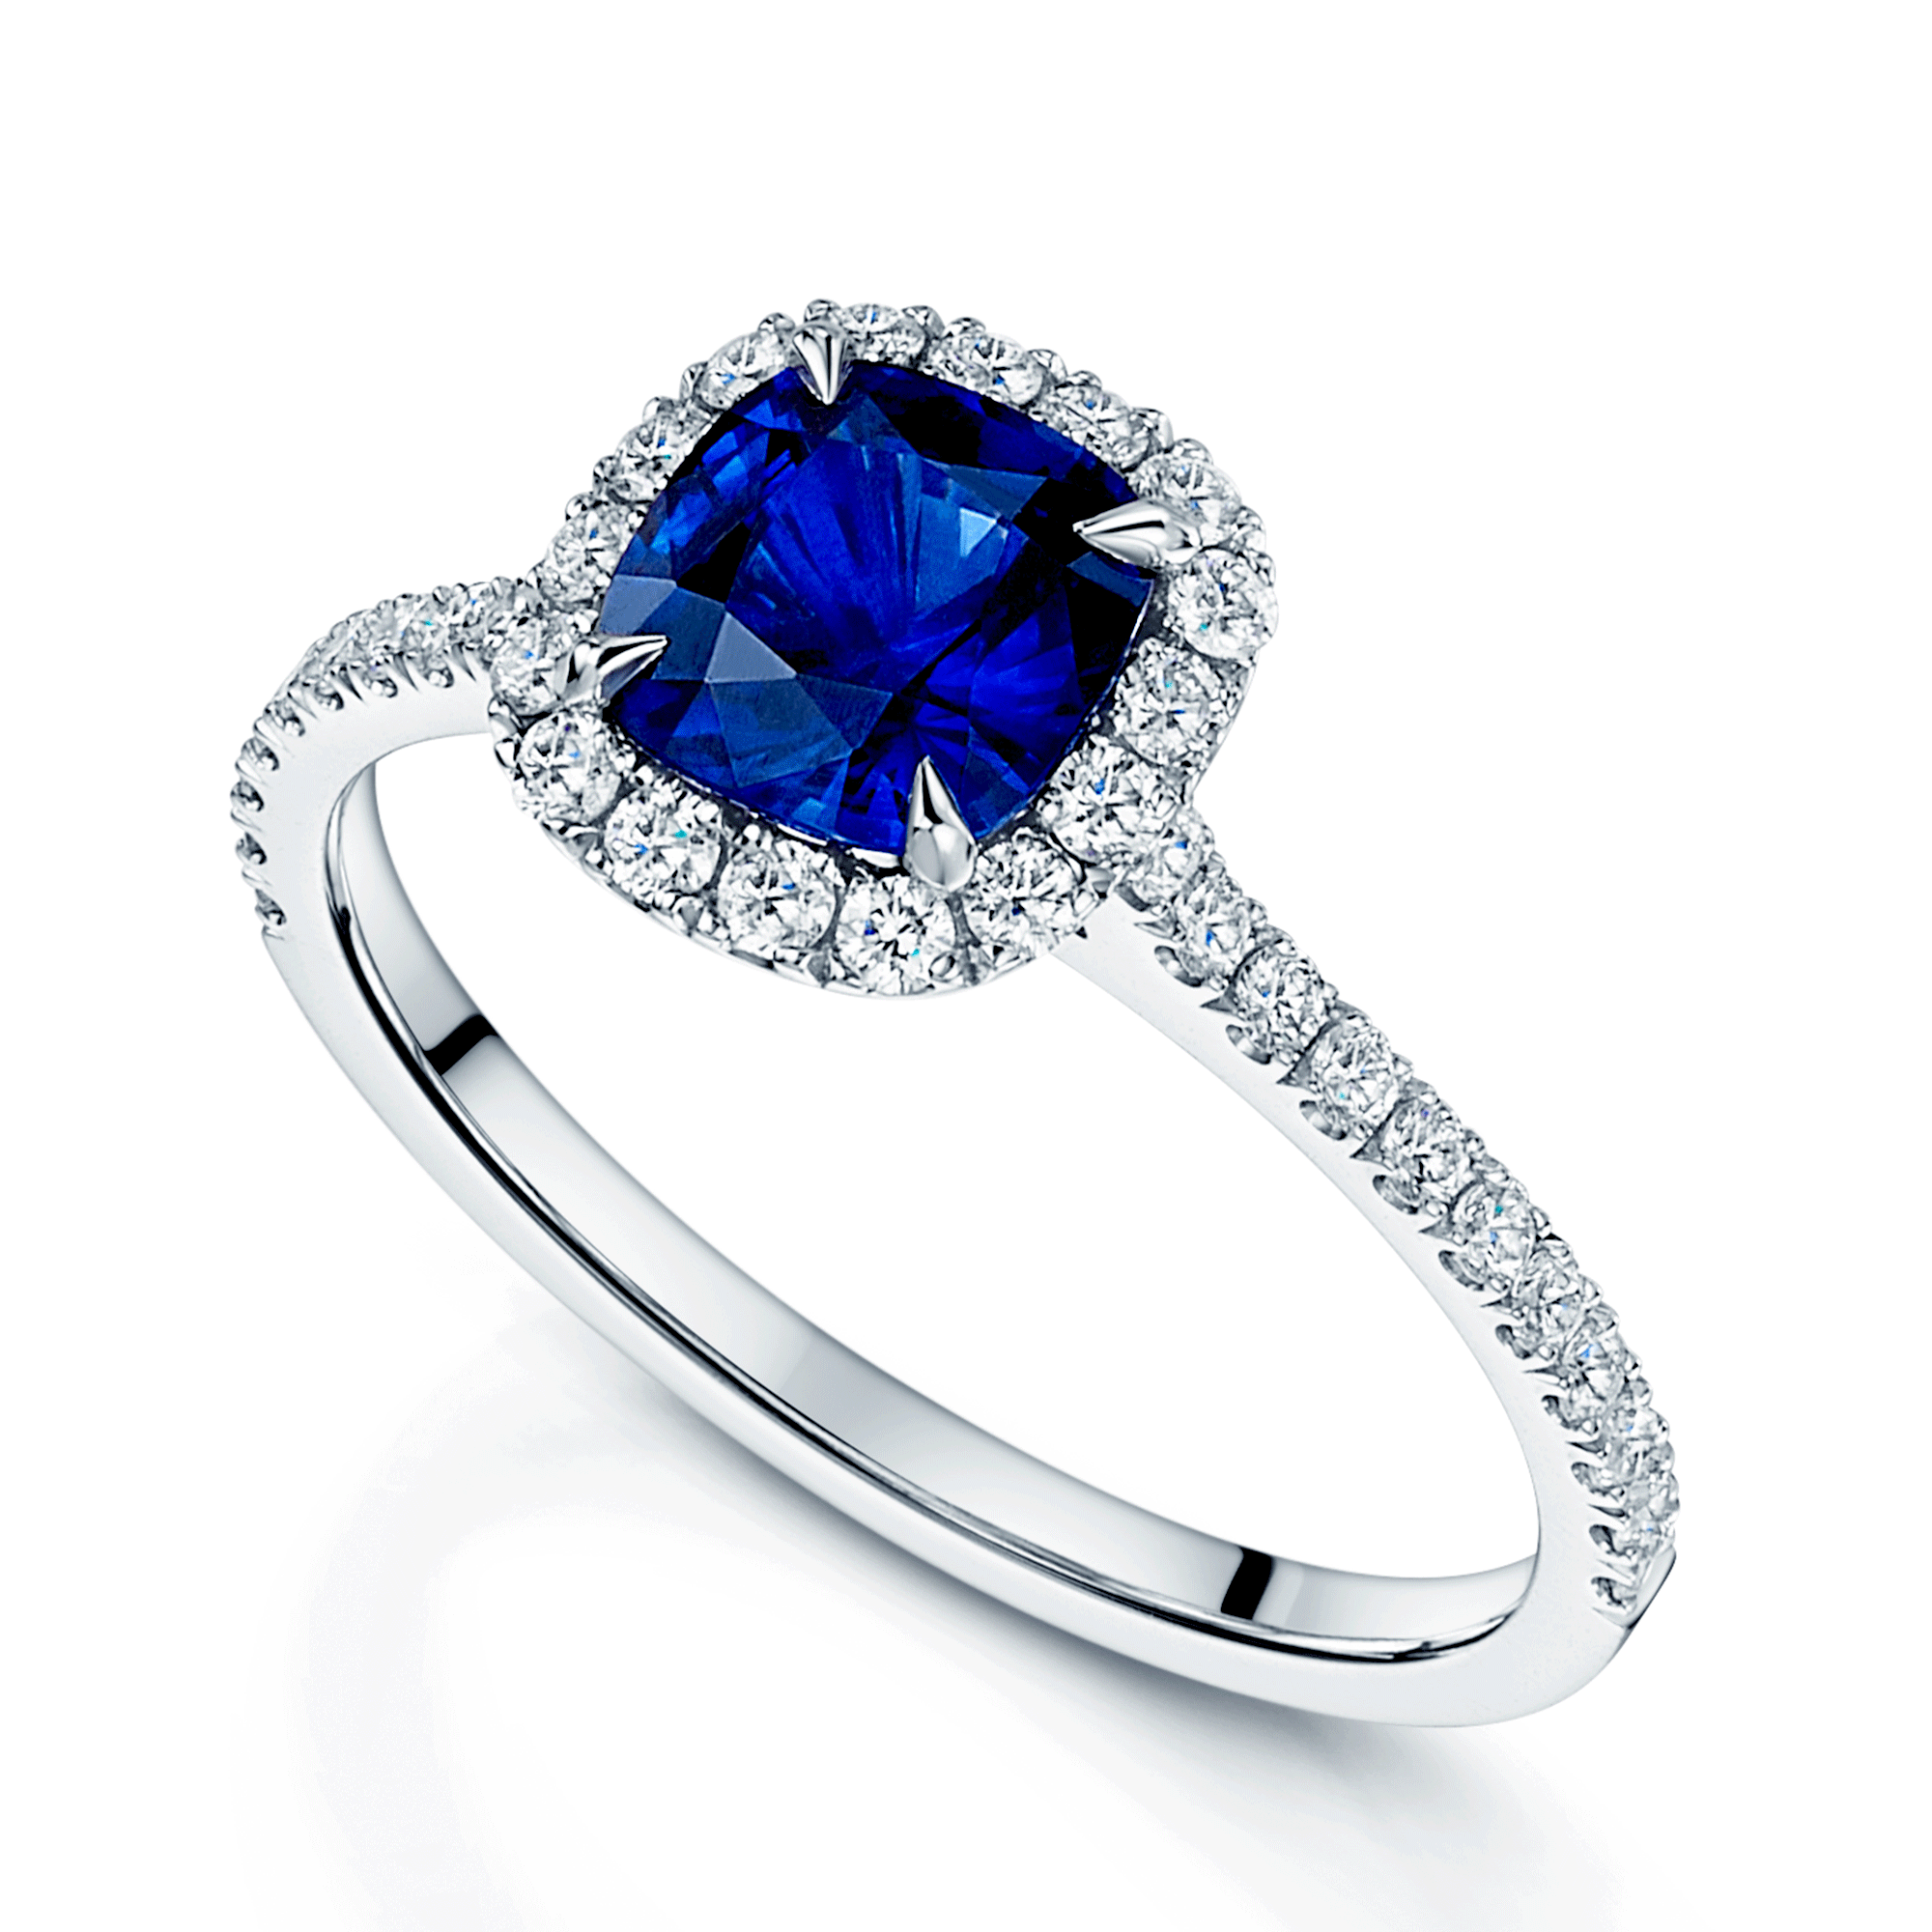 Platinum Cushion Cut Sapphire And Diamond Halo Cluster Ring With Diamond Shoulders.